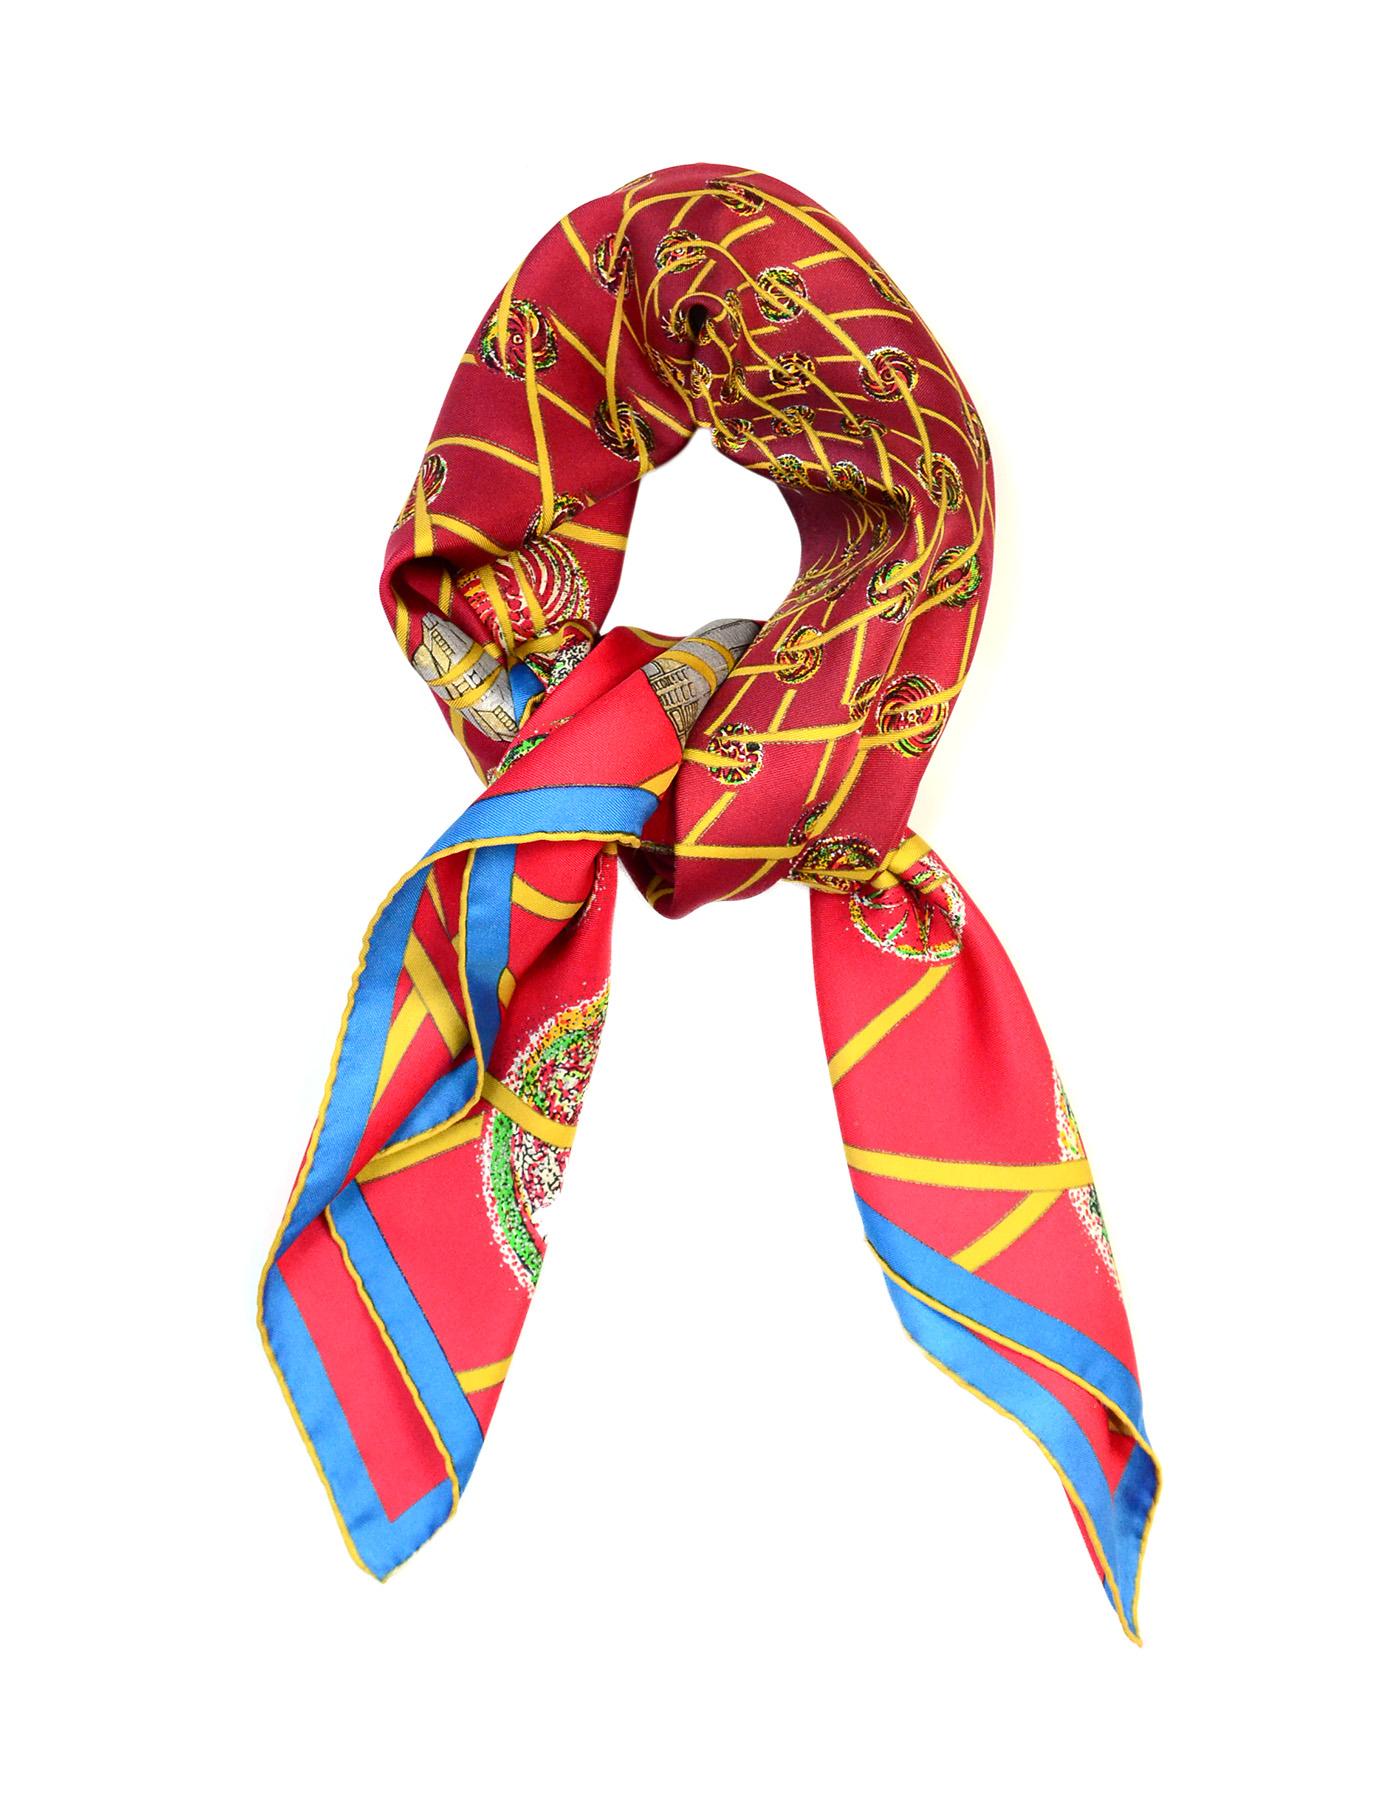 Hermes Red/Multi-Color Les Faux De L'Espace Silk Scarf 

Made In: France
Color: Red and multi-color pattern
Materials: 100% silk
Overall Condition: Excellent pre-owned condition

Measurements: 
34